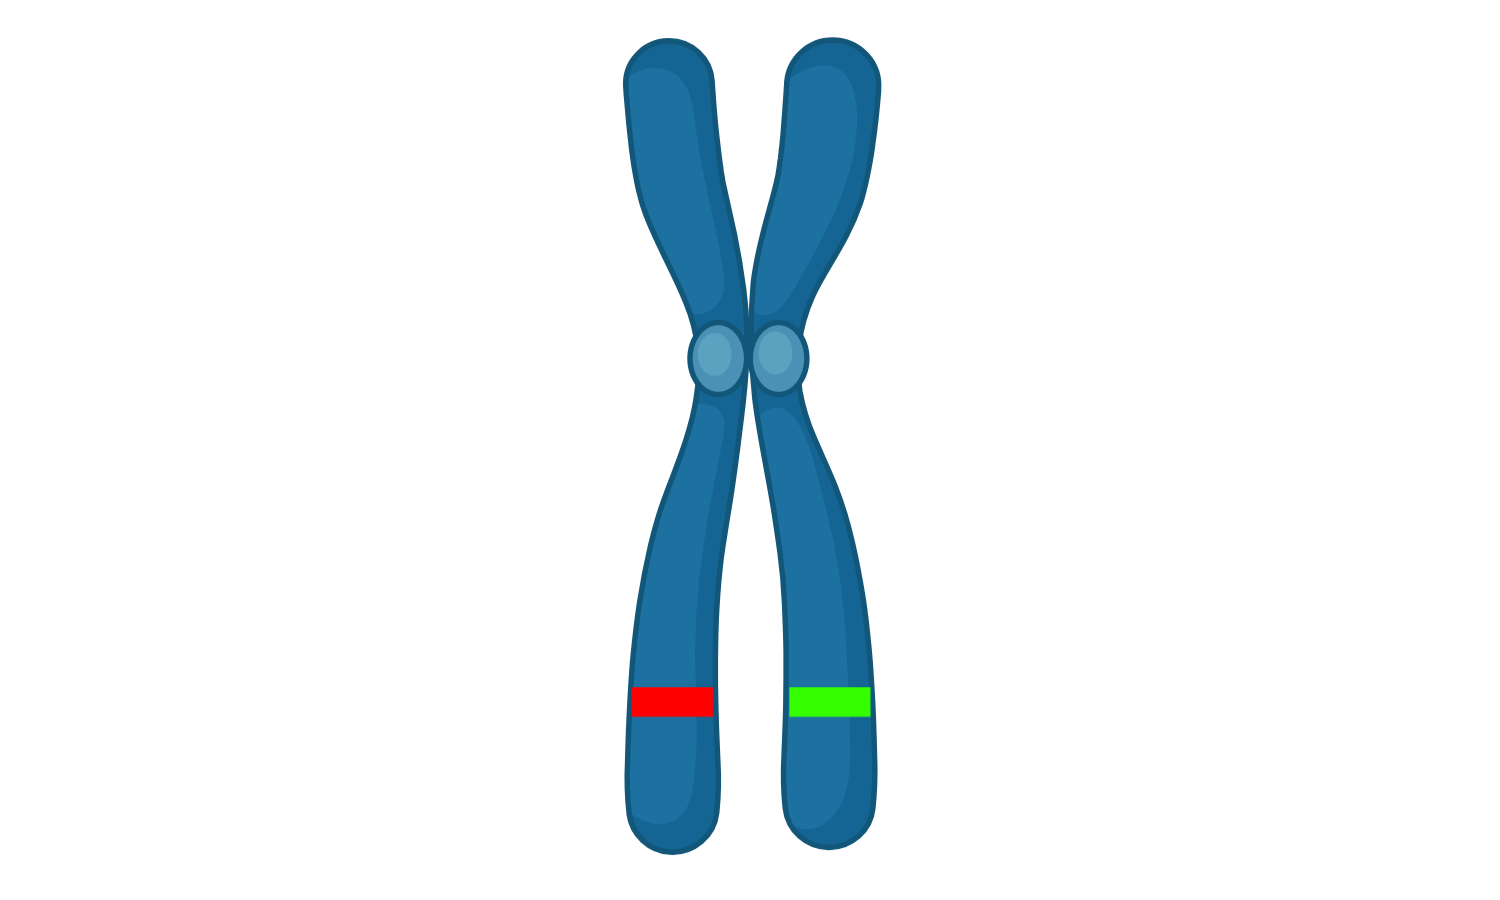 Image of a chromosome with one normal copy of a gene and another defective copy.